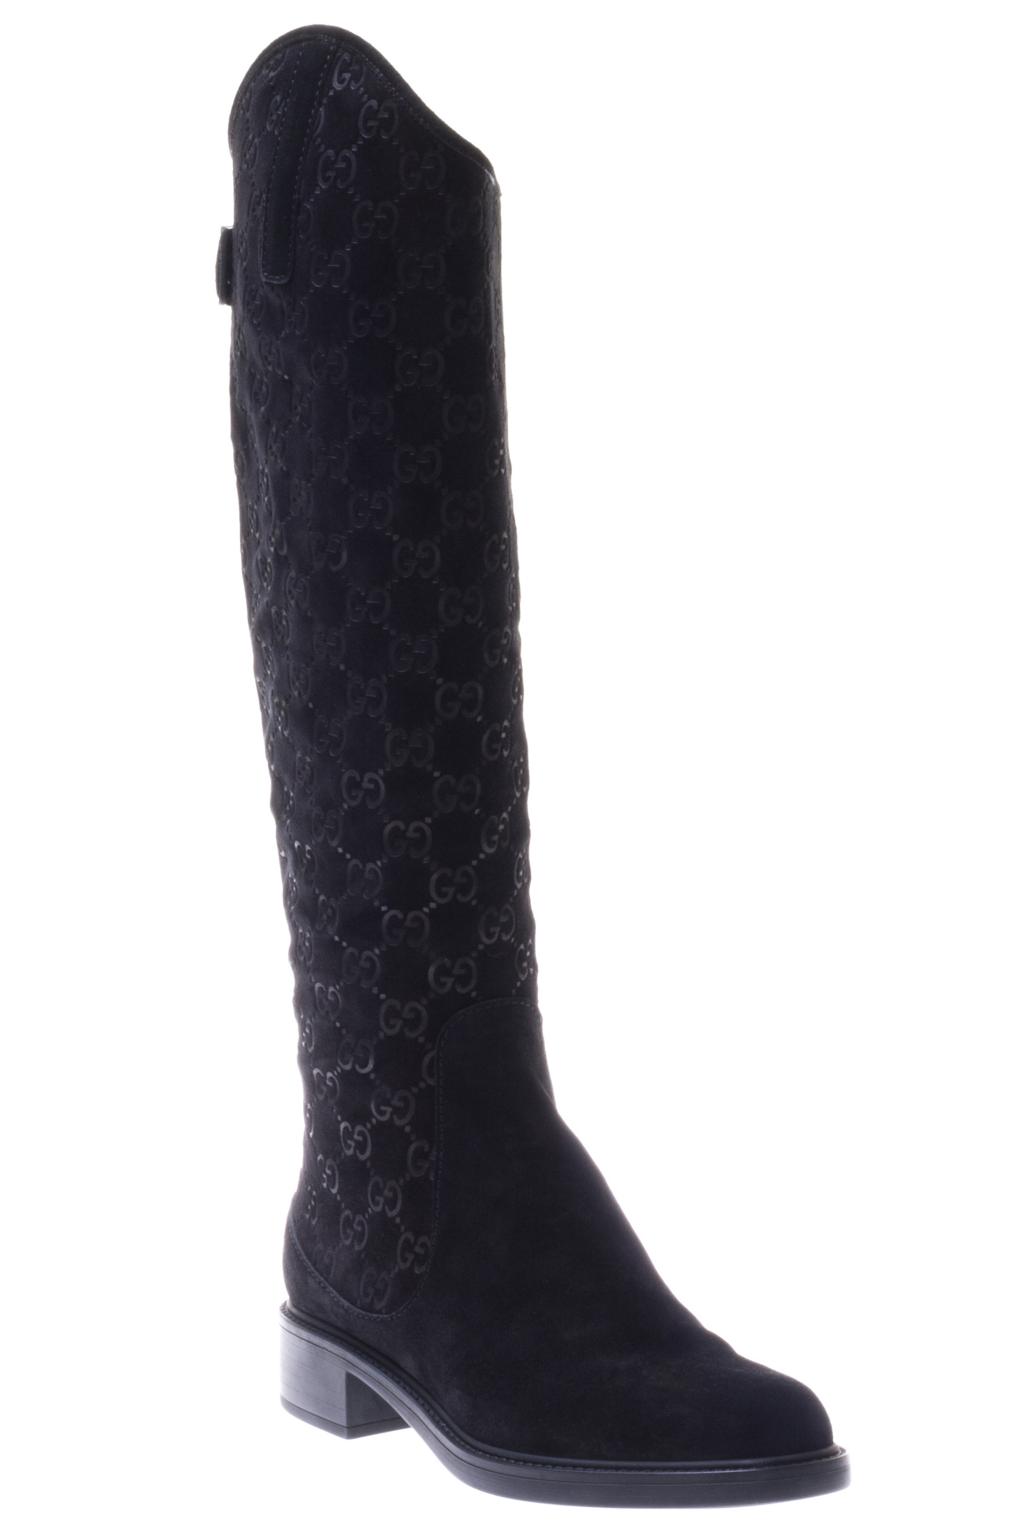 gucci maud riding boots